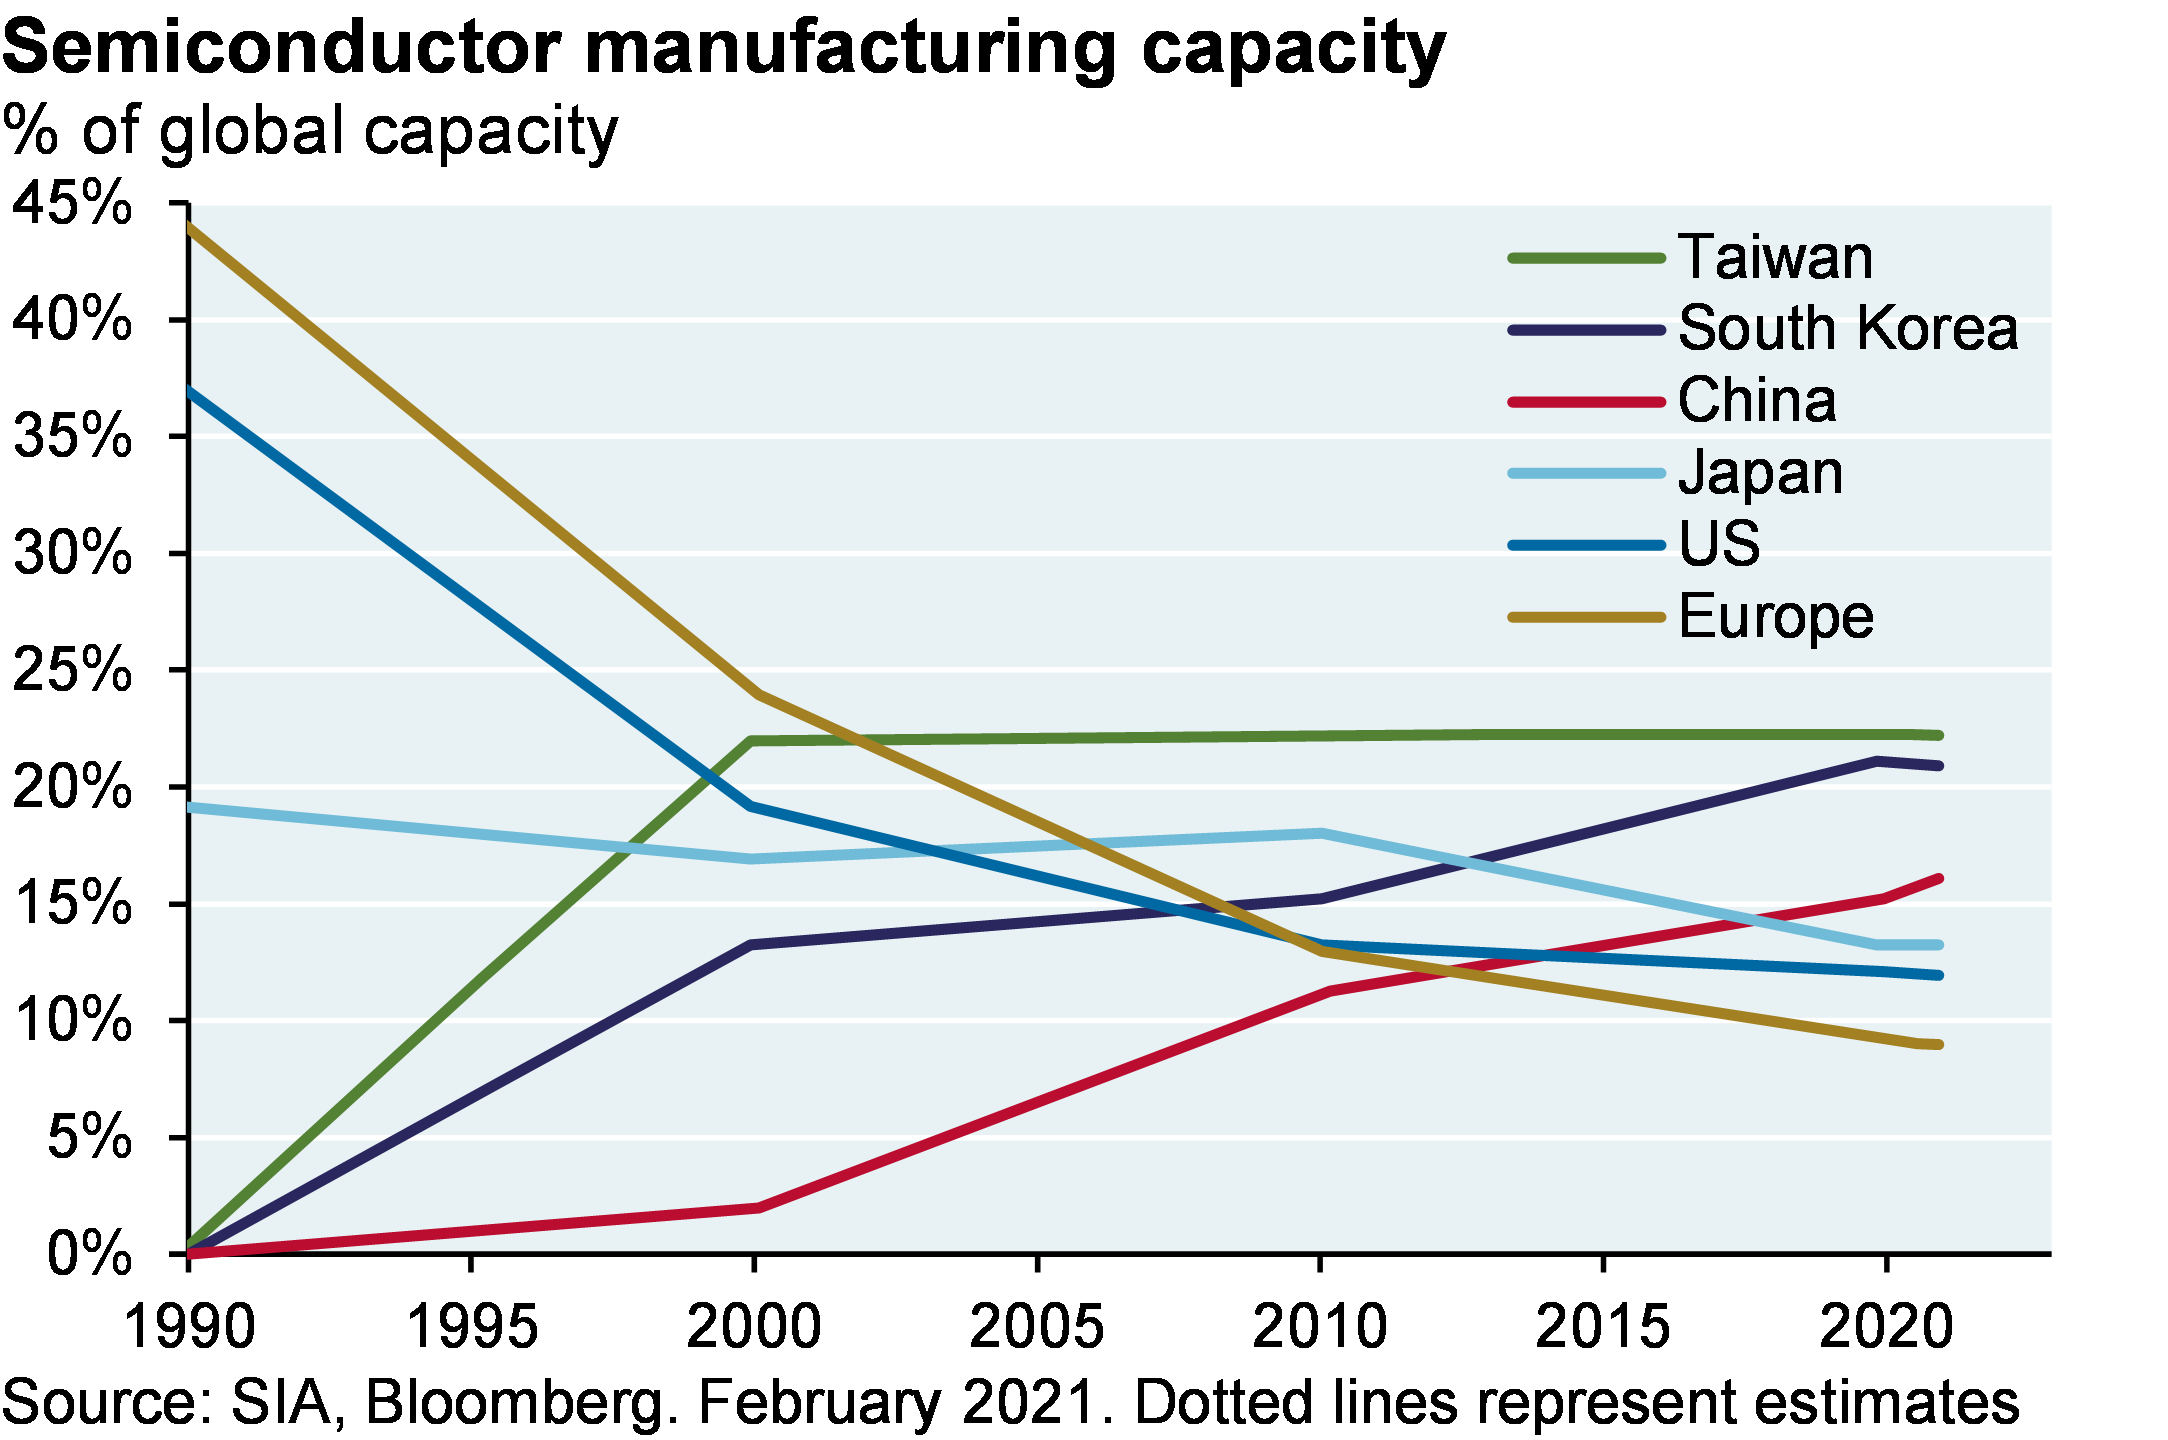 Line chart compares the share of global semiconductor manufacturing capacity for Taiwan, South Korea, China, Japan, US and Europe since 1990. The chart shows that since 1990, the US has fallen from a share of 37% to 12%, while Taiwan has risen to the largest share at 22%.